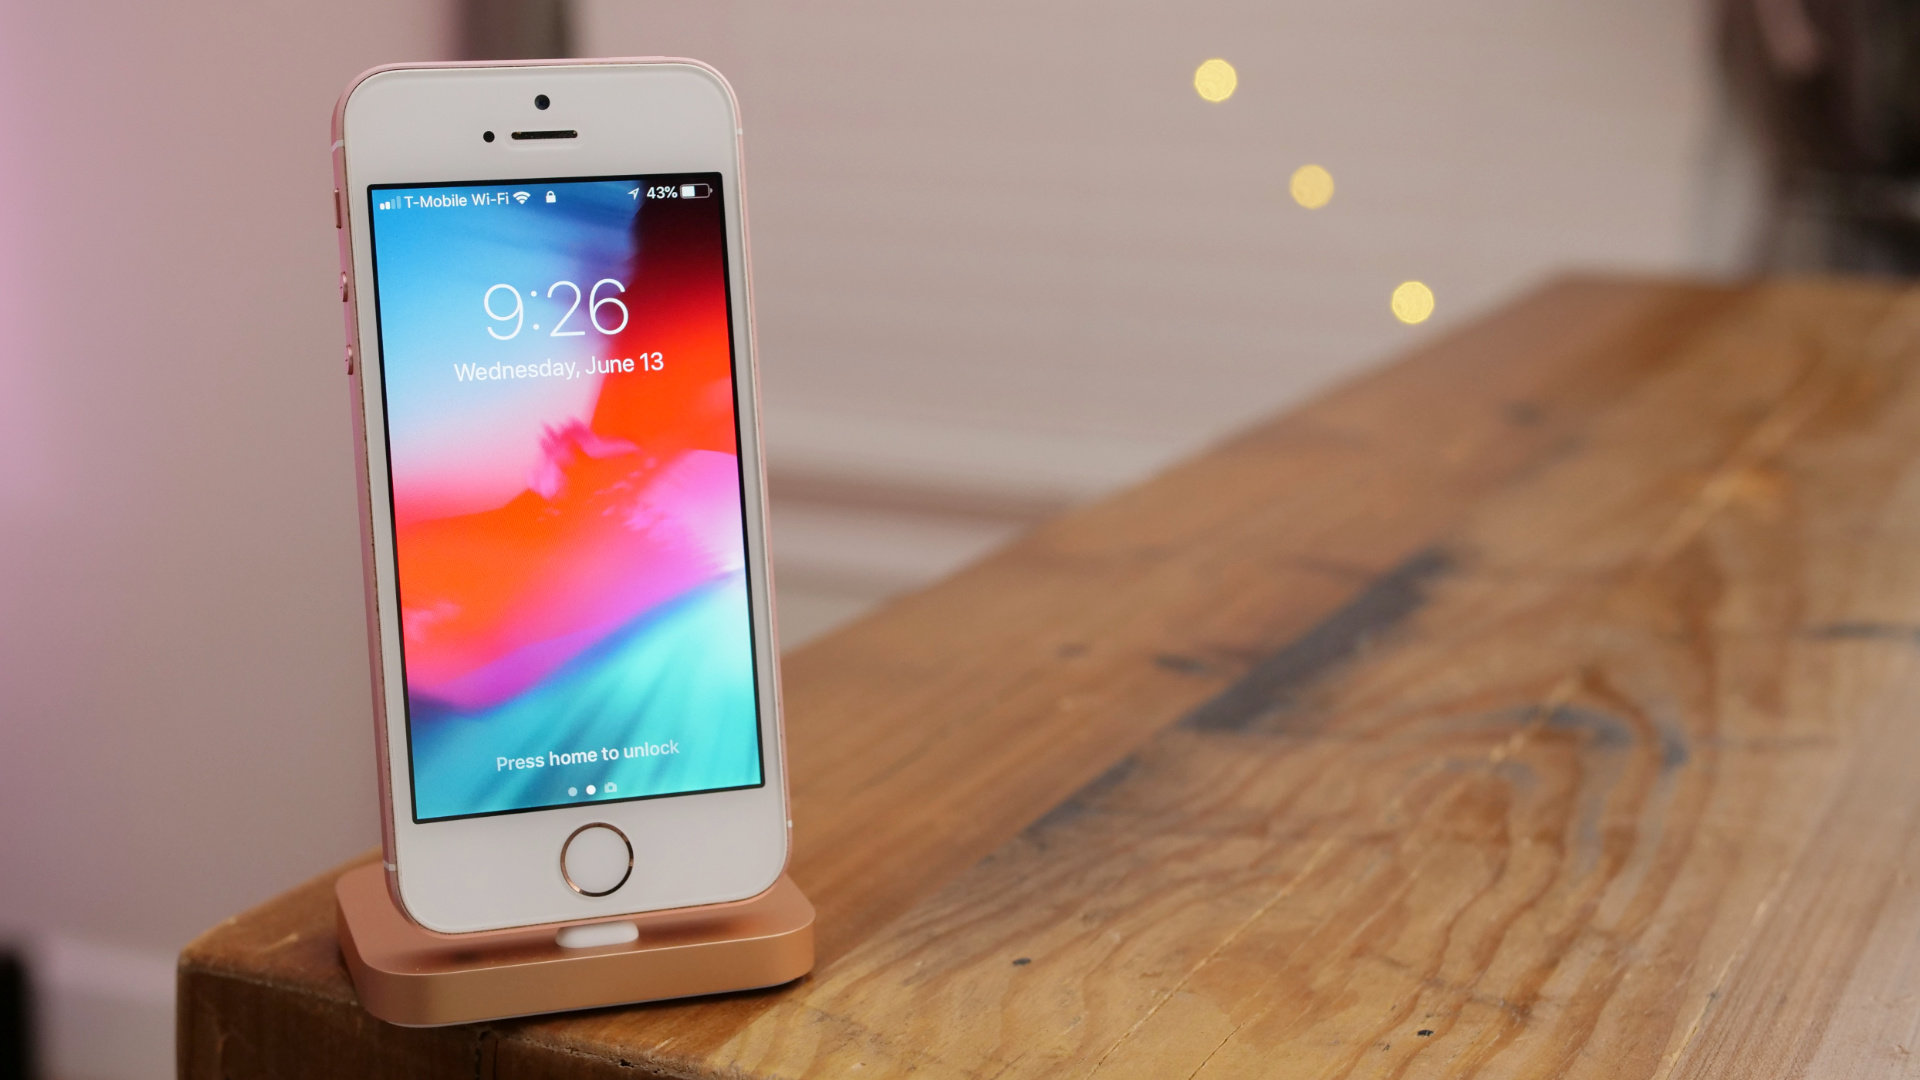 12 Things We Learned About the iPhone 6